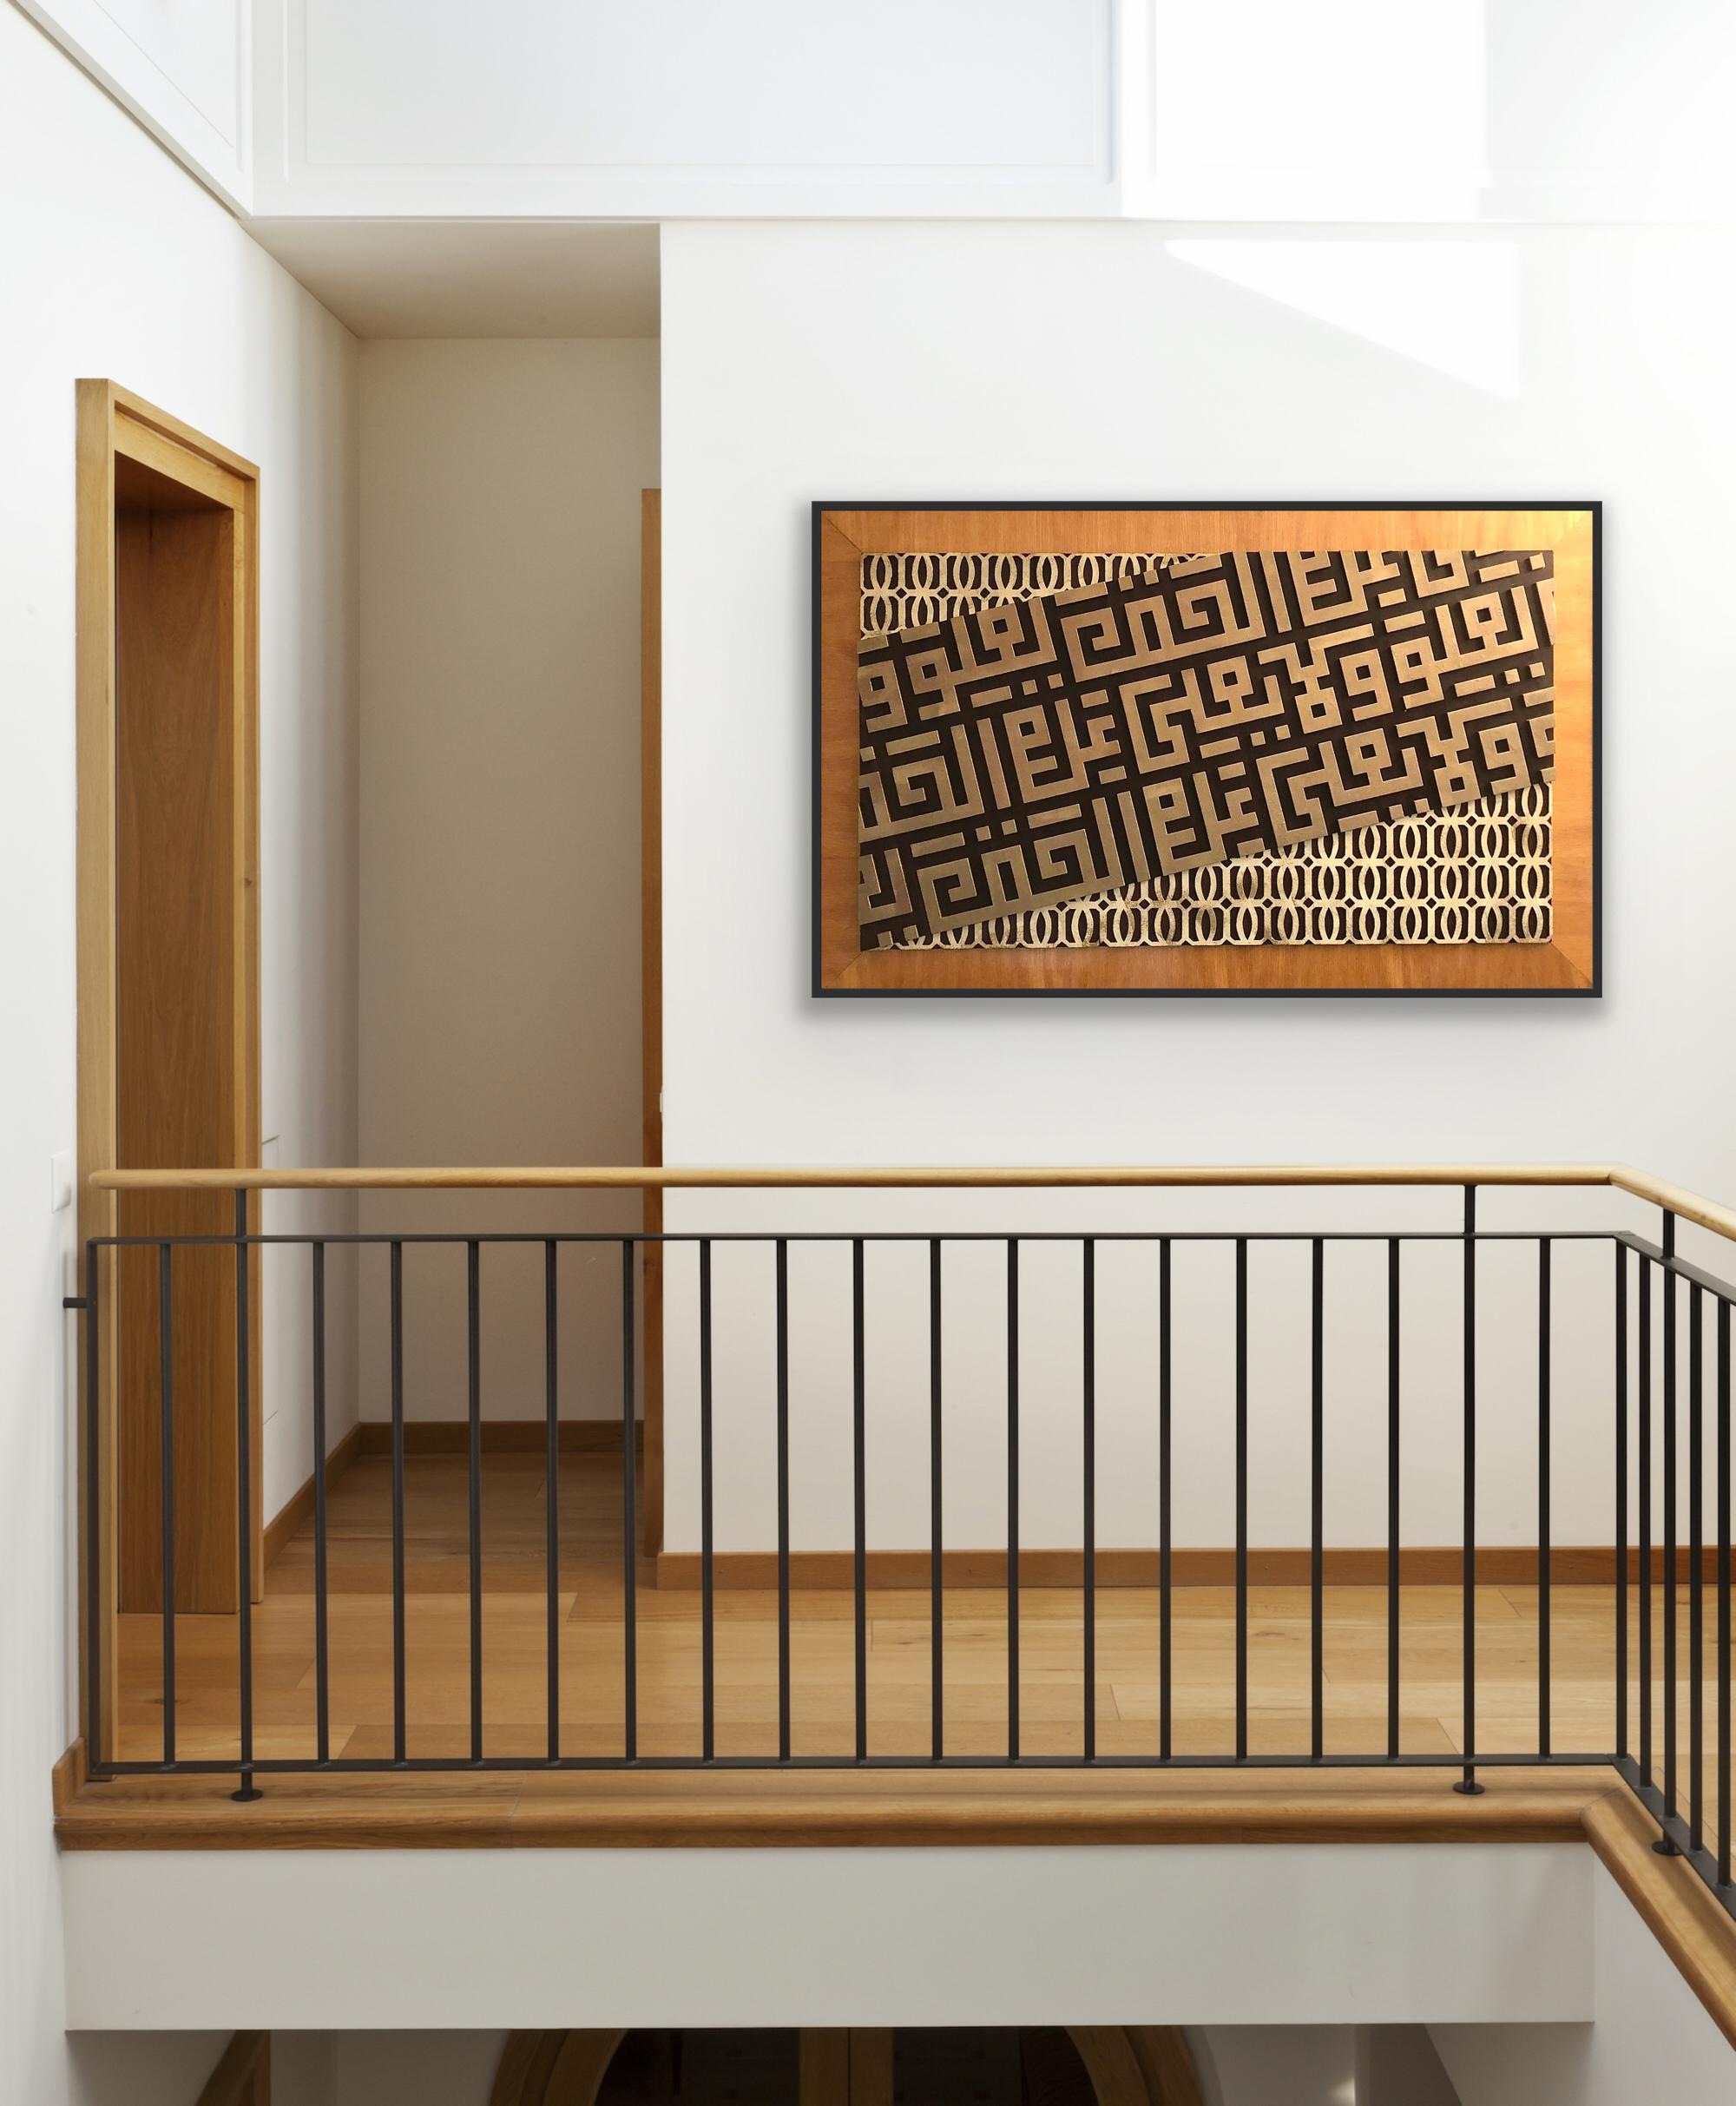 Stunning carved abstract calligraphy artwork on wood panel by Bahrain artist Ali Al Mahmeed, Signed verso. Size: 29.5 x 48 in / 75 x 122 cm (framed).

Spanning over 30 years, Ali Al Mahmeed has carved out a career as an artist, eventually becoming